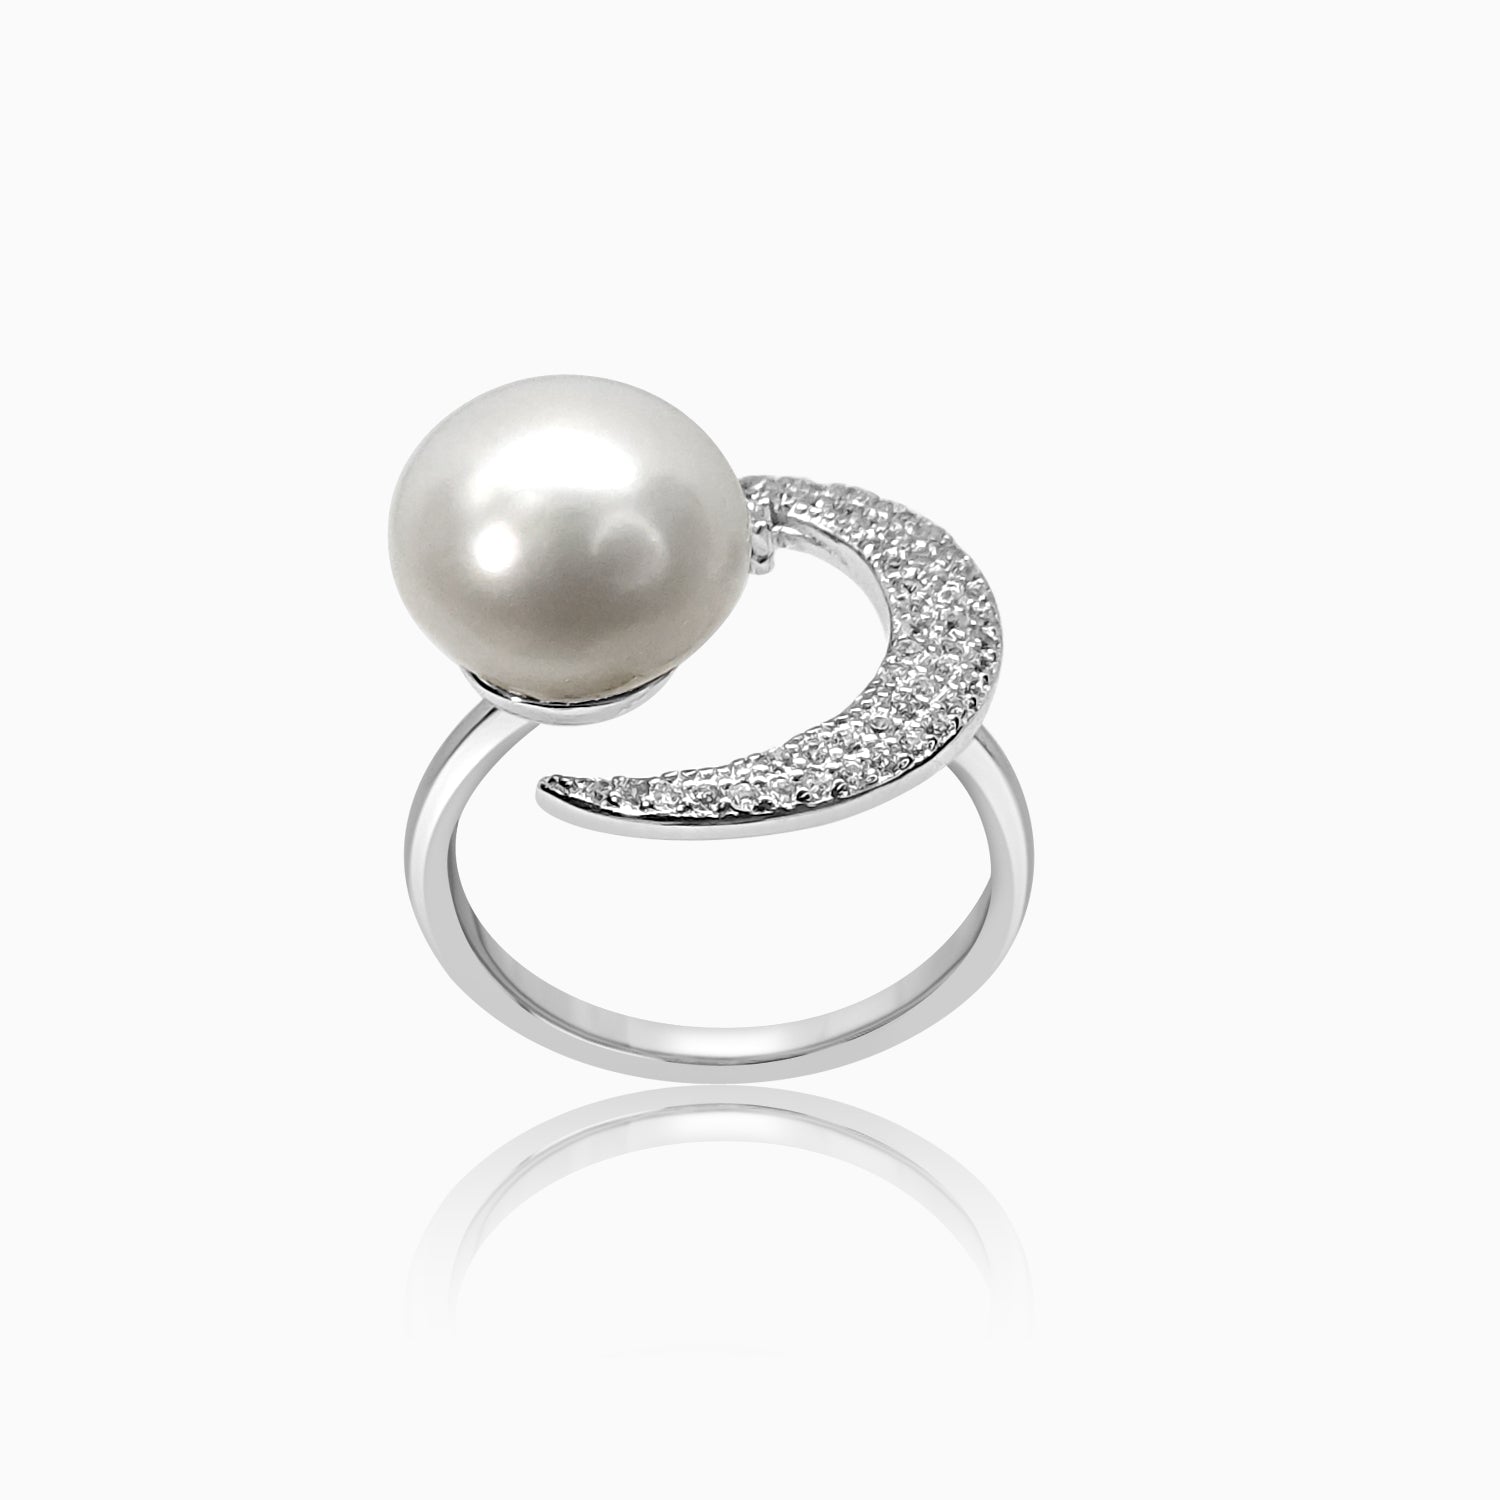 Silver Sparkling Moon Pearl Adjustable Ring